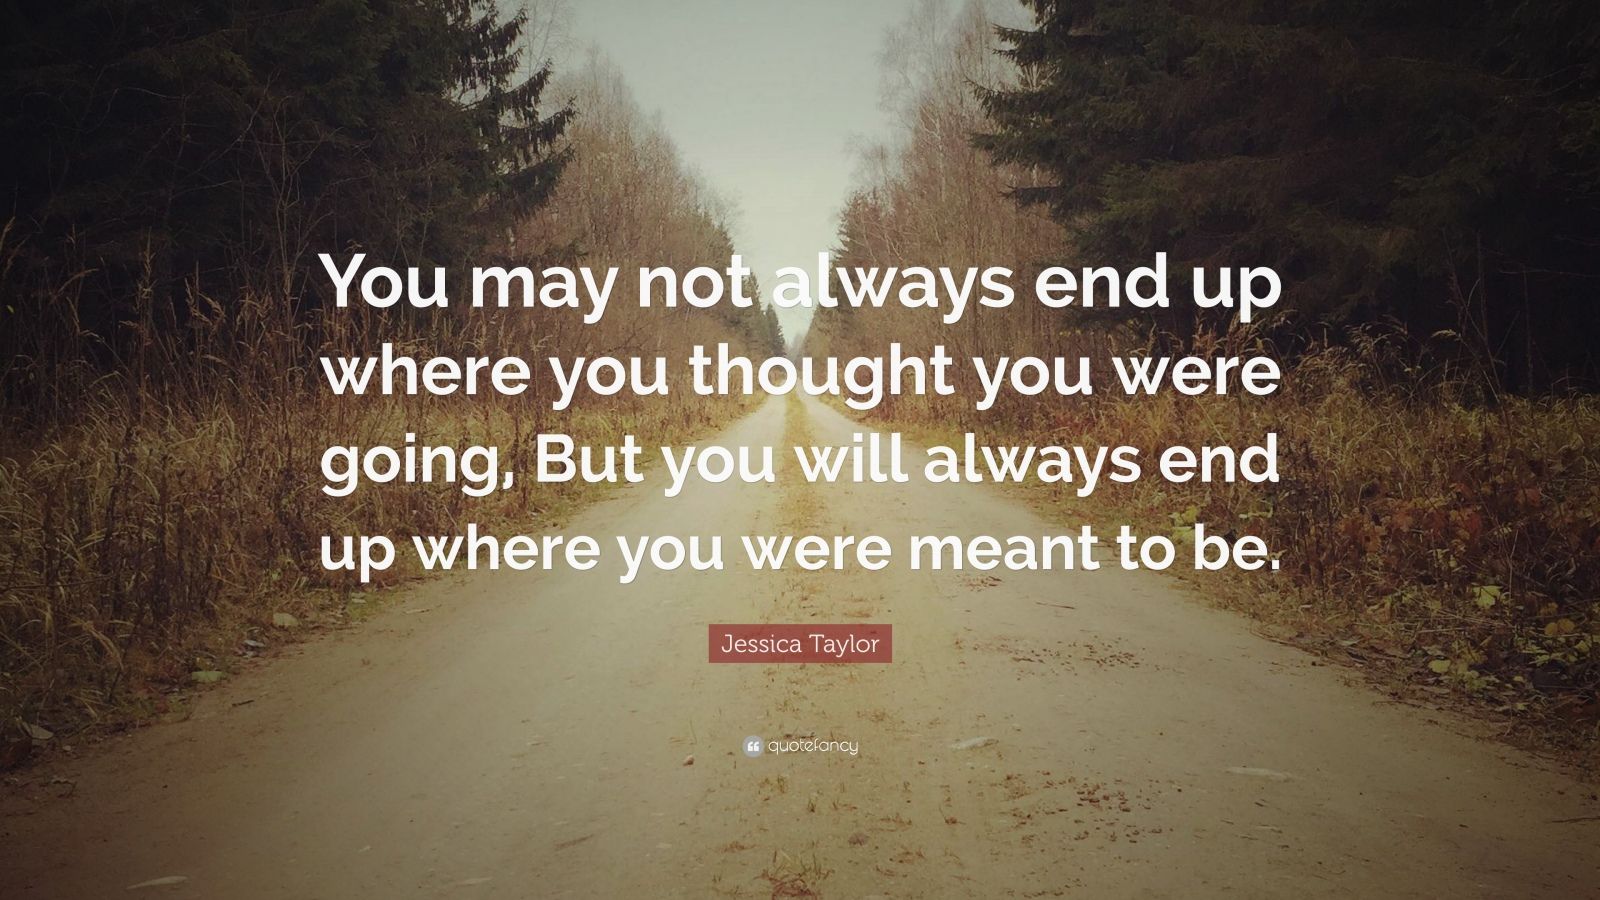 Jessica Taylor Quote: “You may not always end up where you thought you